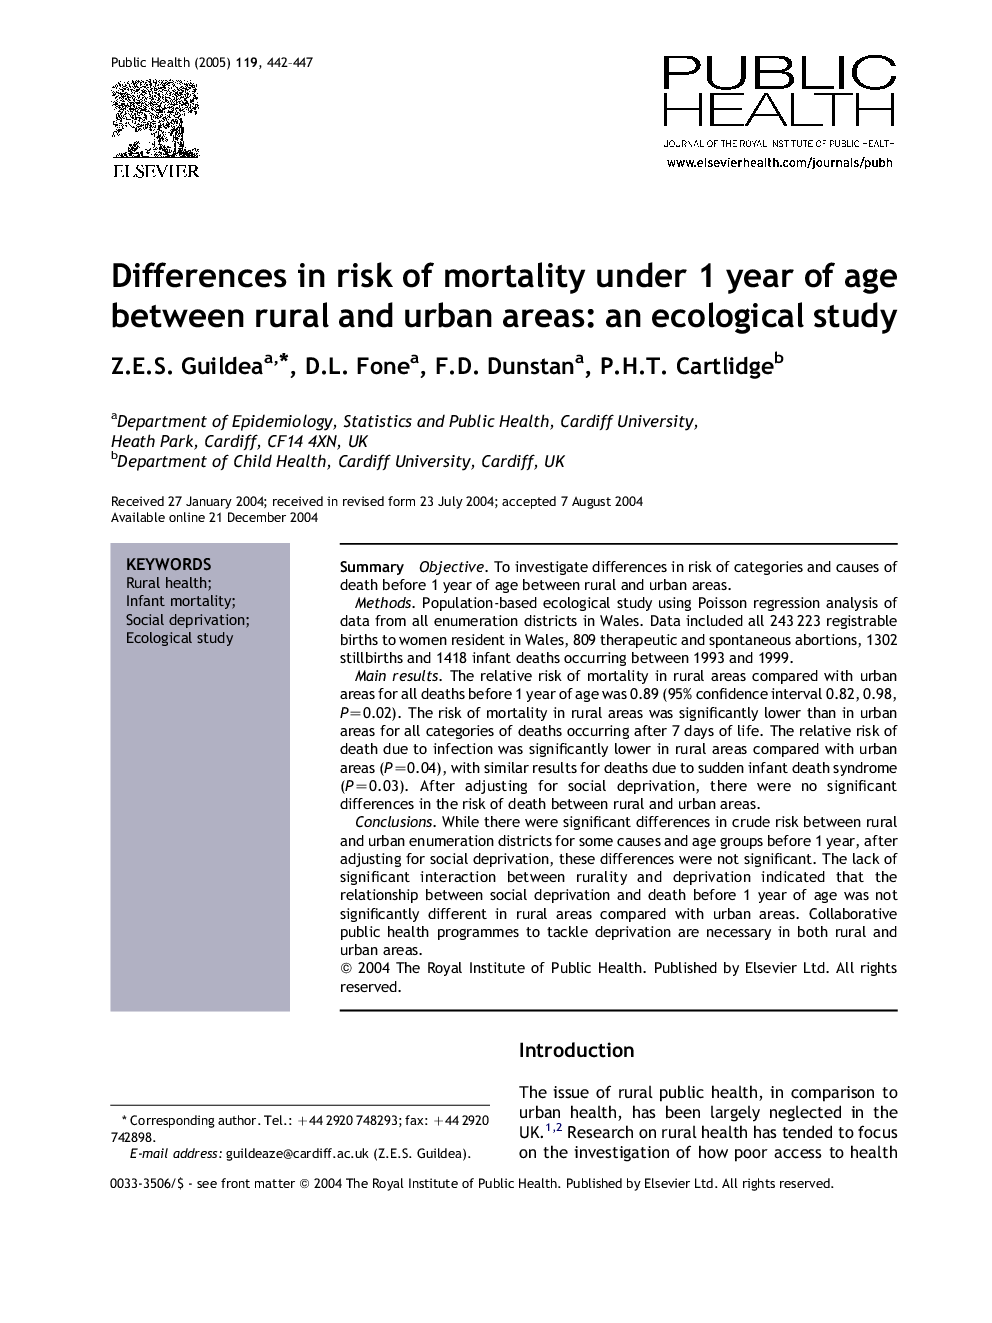 Differences in risk of mortality under 1 year of age between rural and urban areas: an ecological study